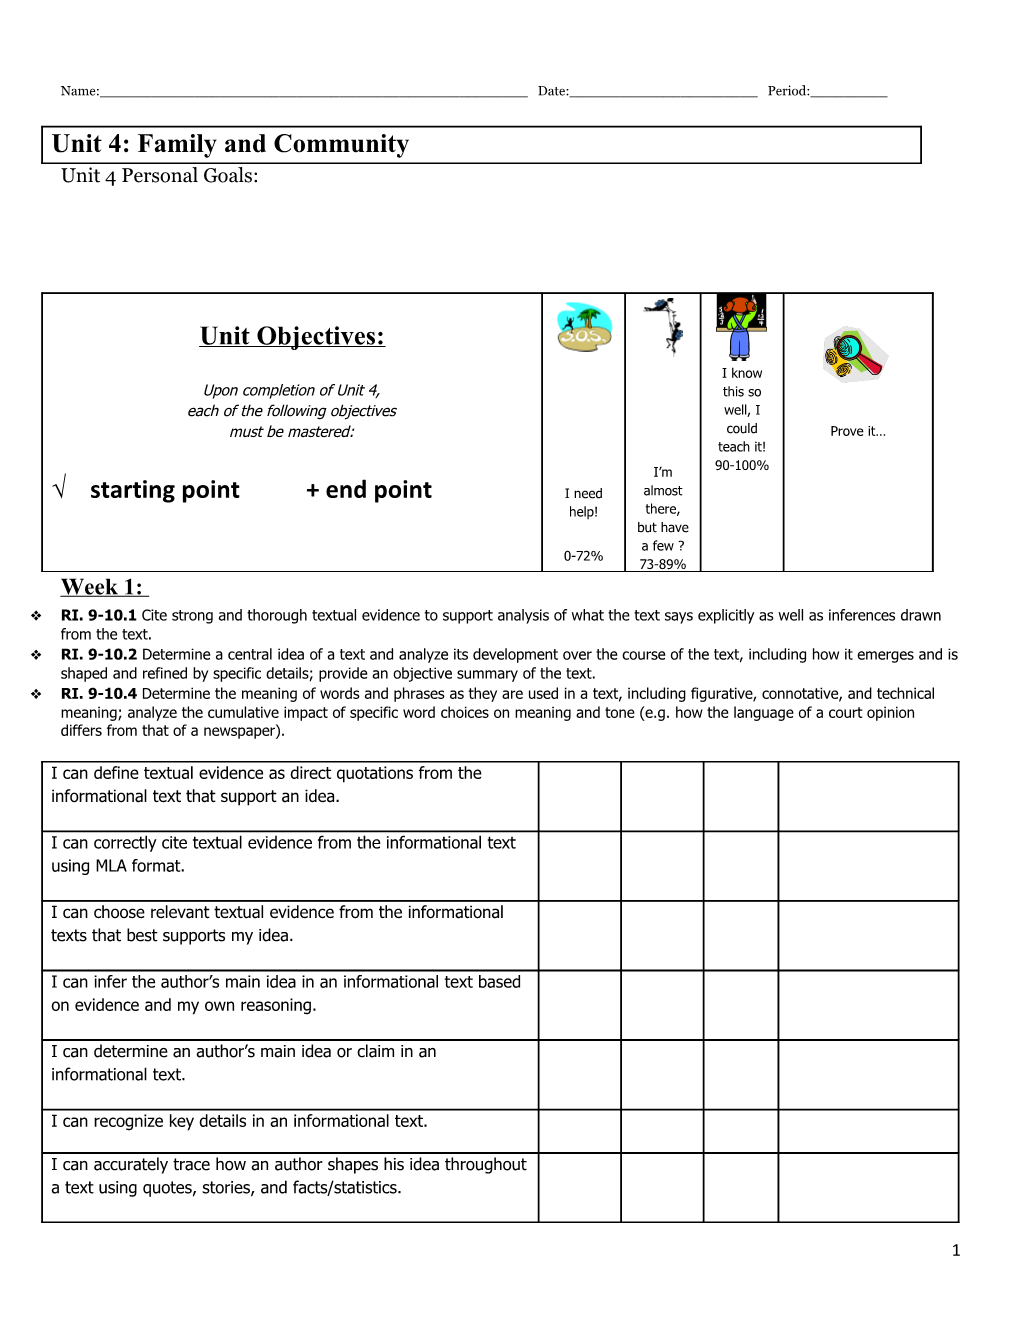 Unit 4 Learning Target Checklist